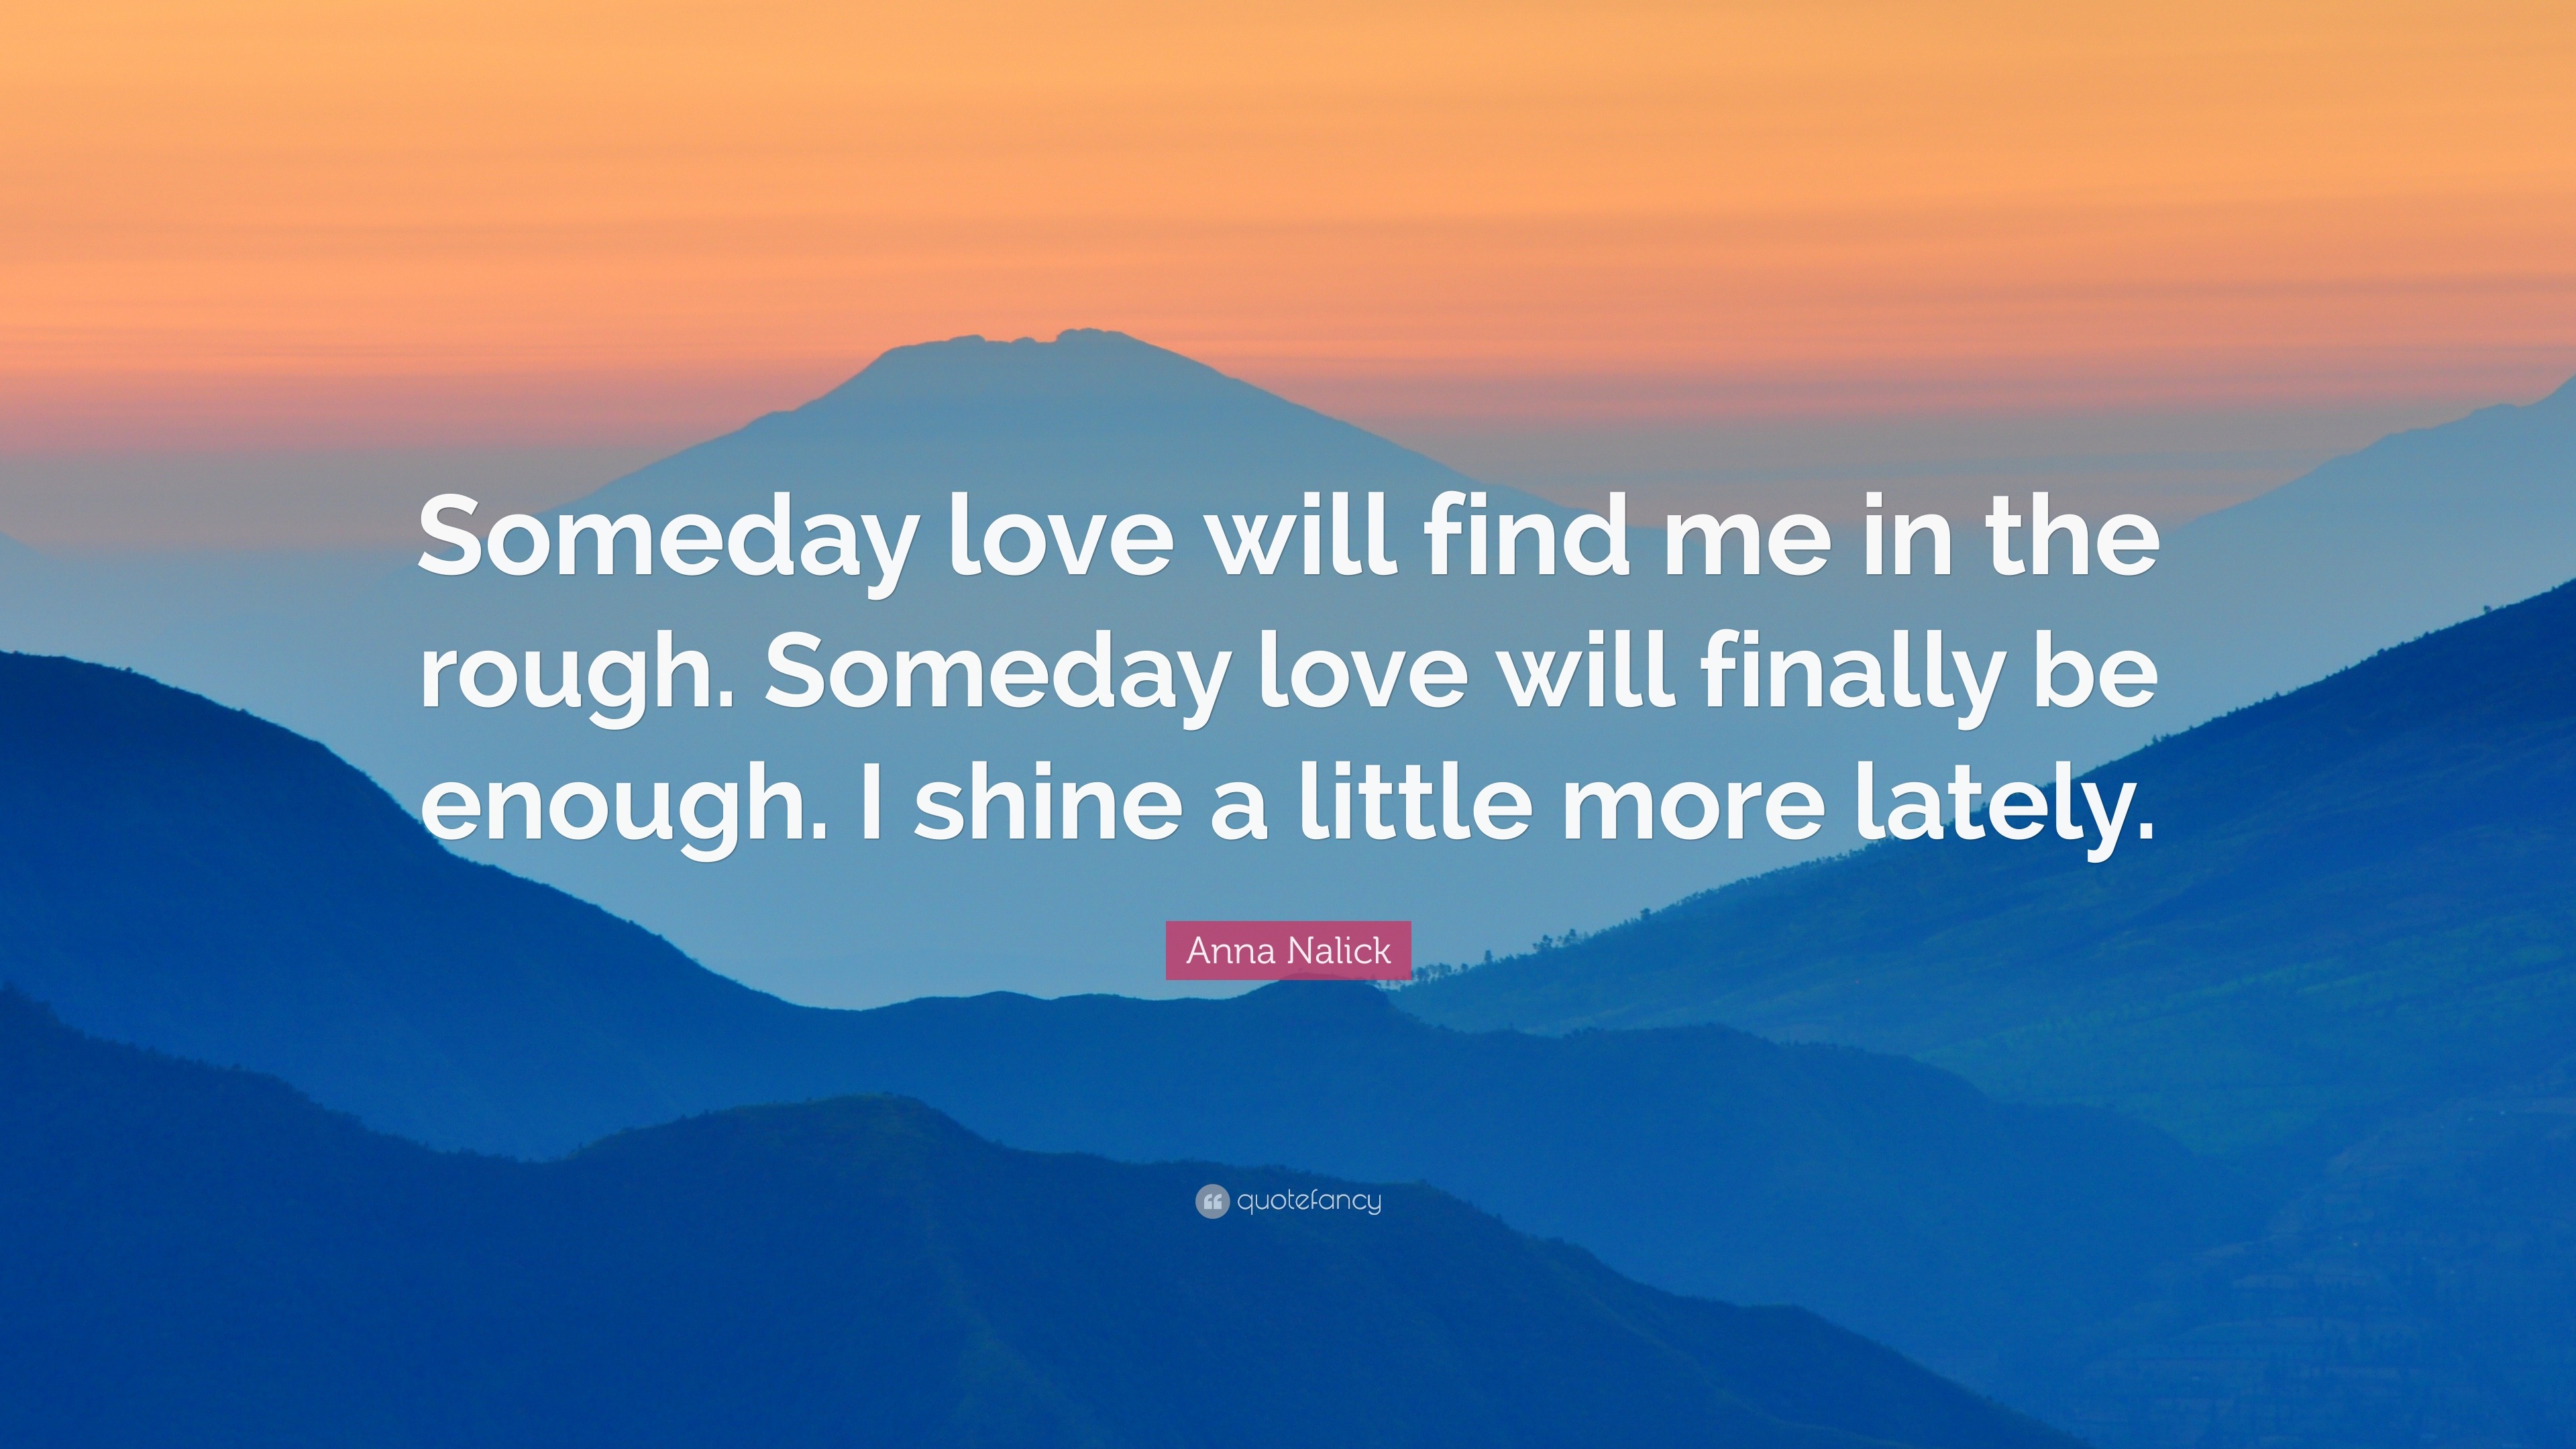 Anna Nalick Quote “Someday love will find me in the rough Someday love